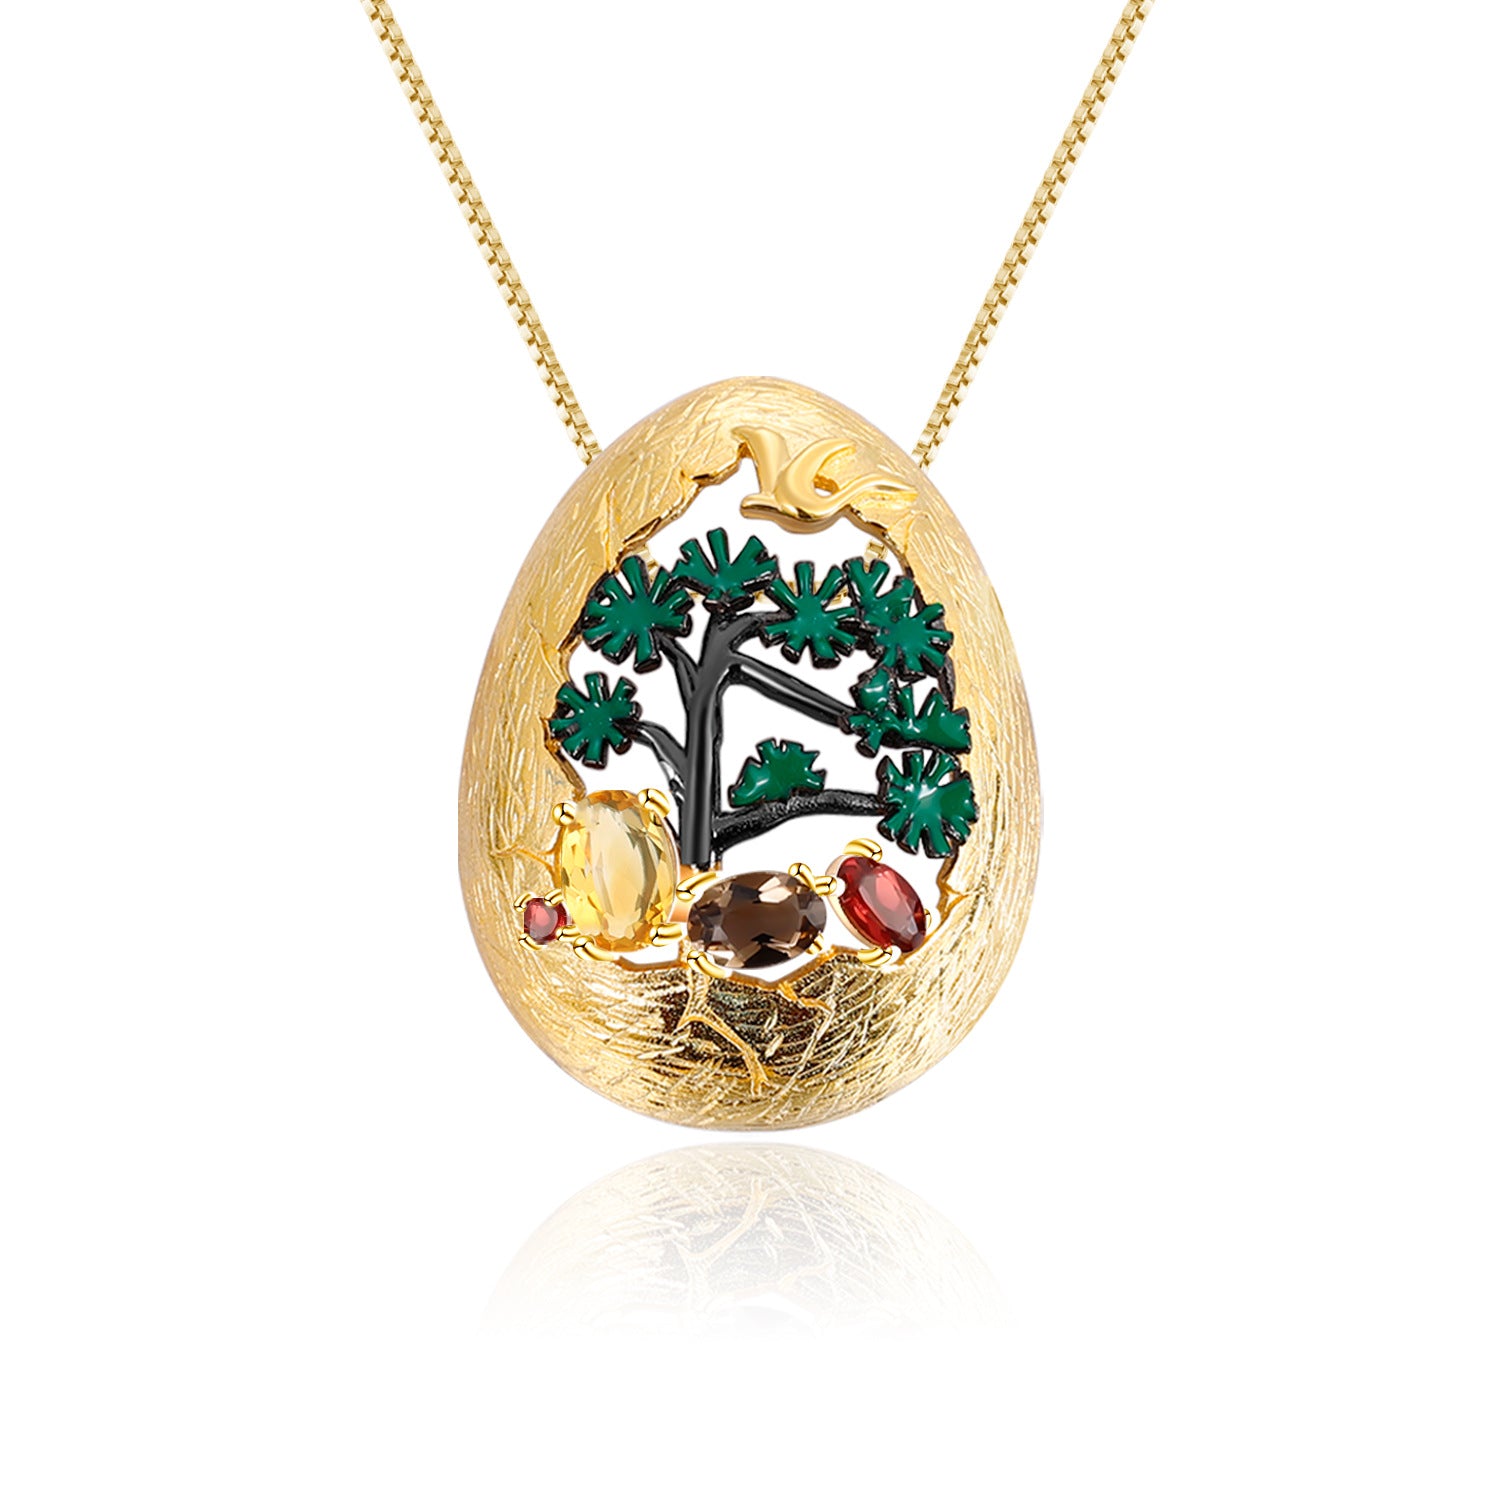 High-level Personality Natural Design Colorful Gemstone Egg Shape with Tree Pendant Silver Necklace for Women